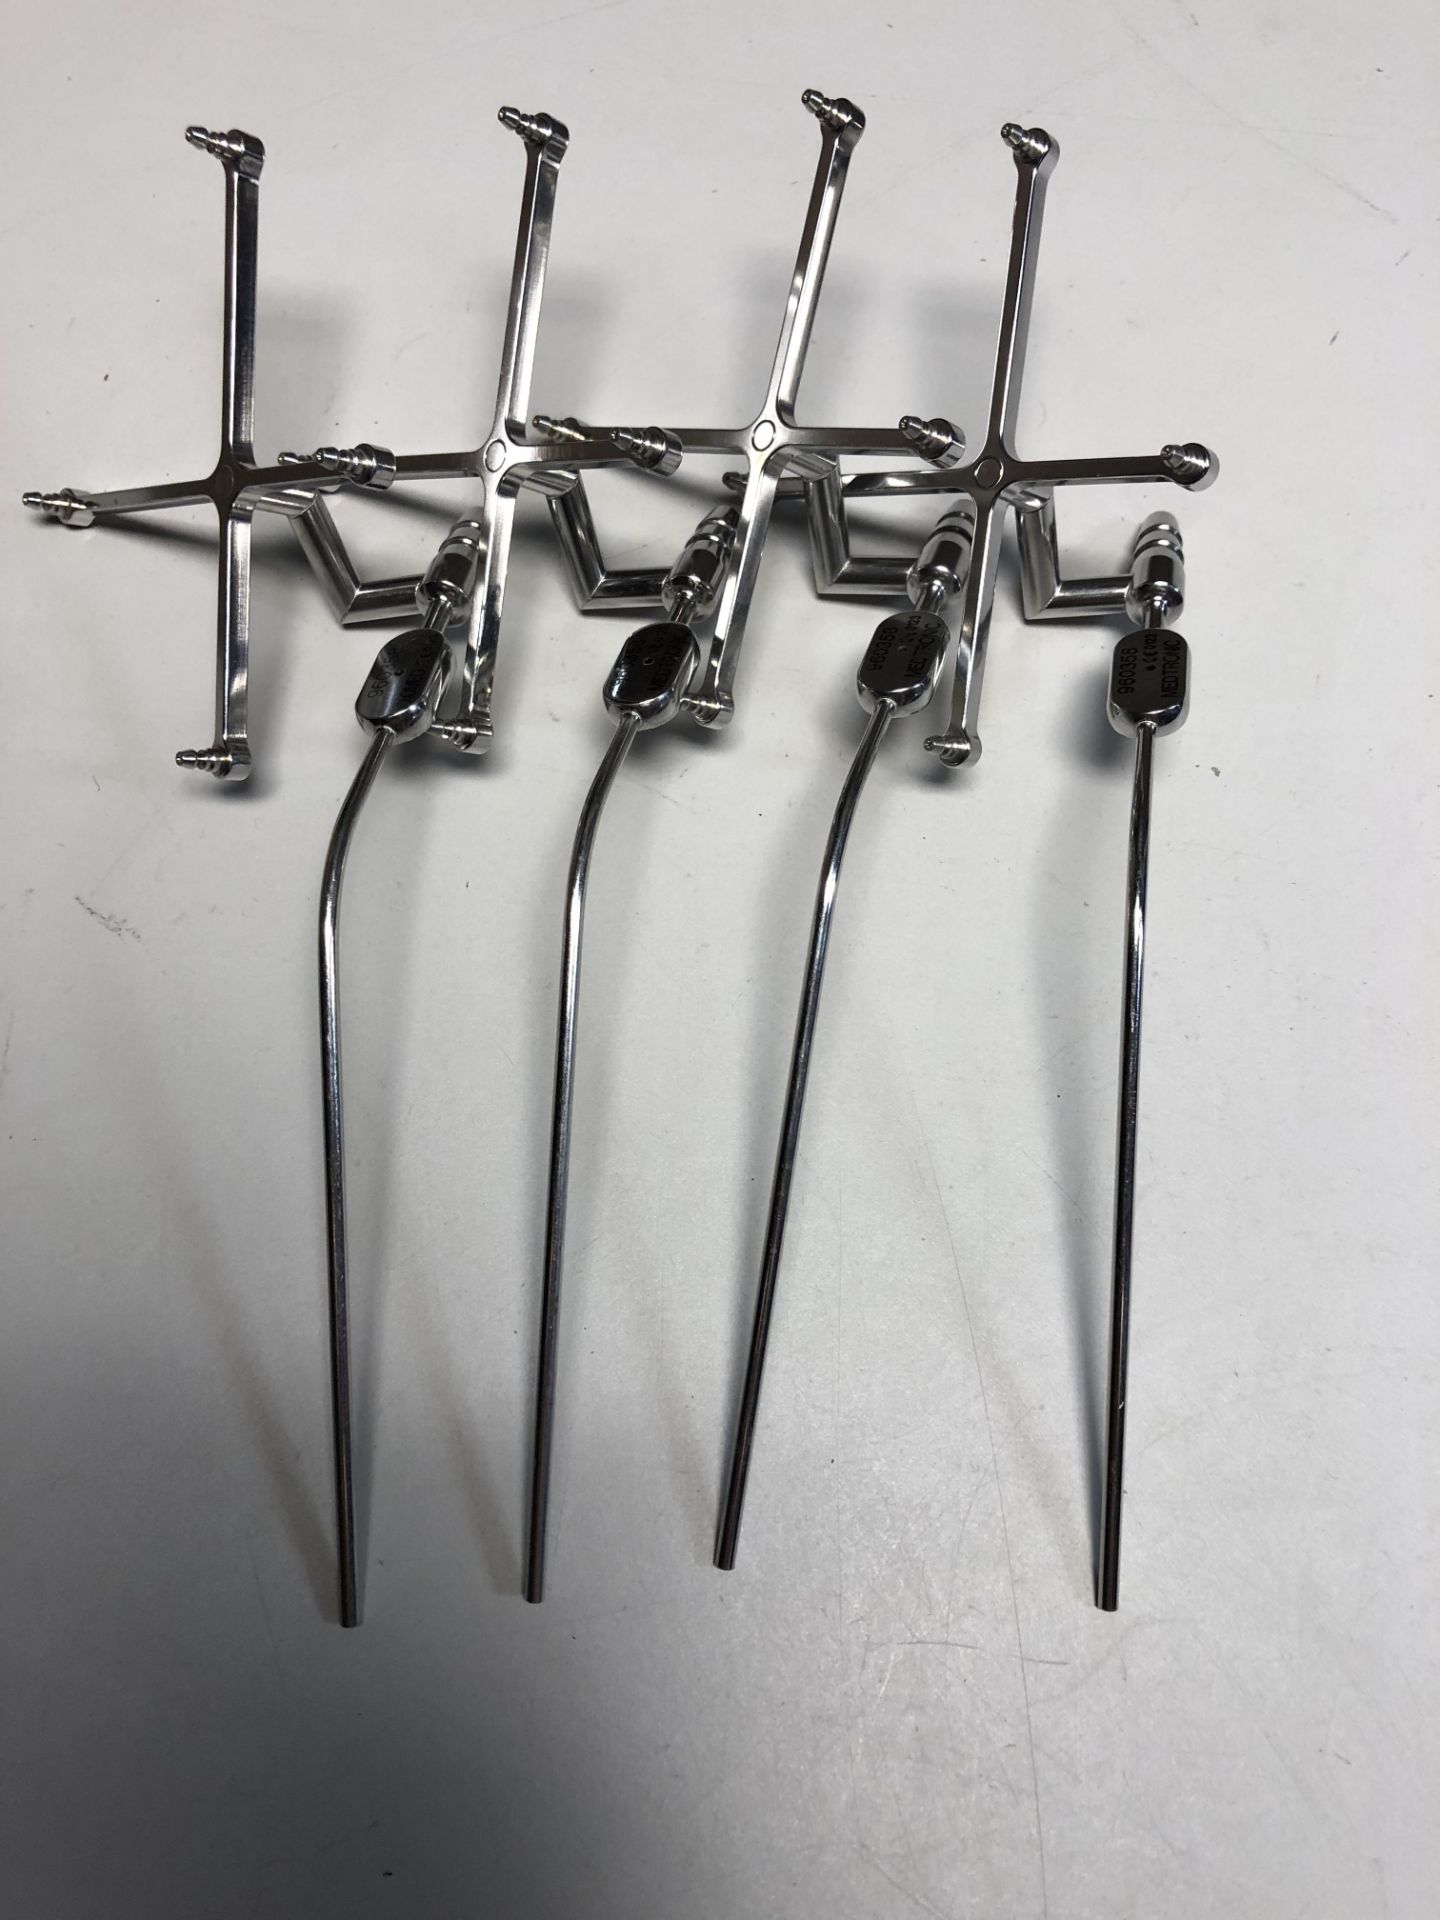 LOT OF MEDTRONIC ENT SURGICAL NAVIGATION SUCTION INTRUMENTS